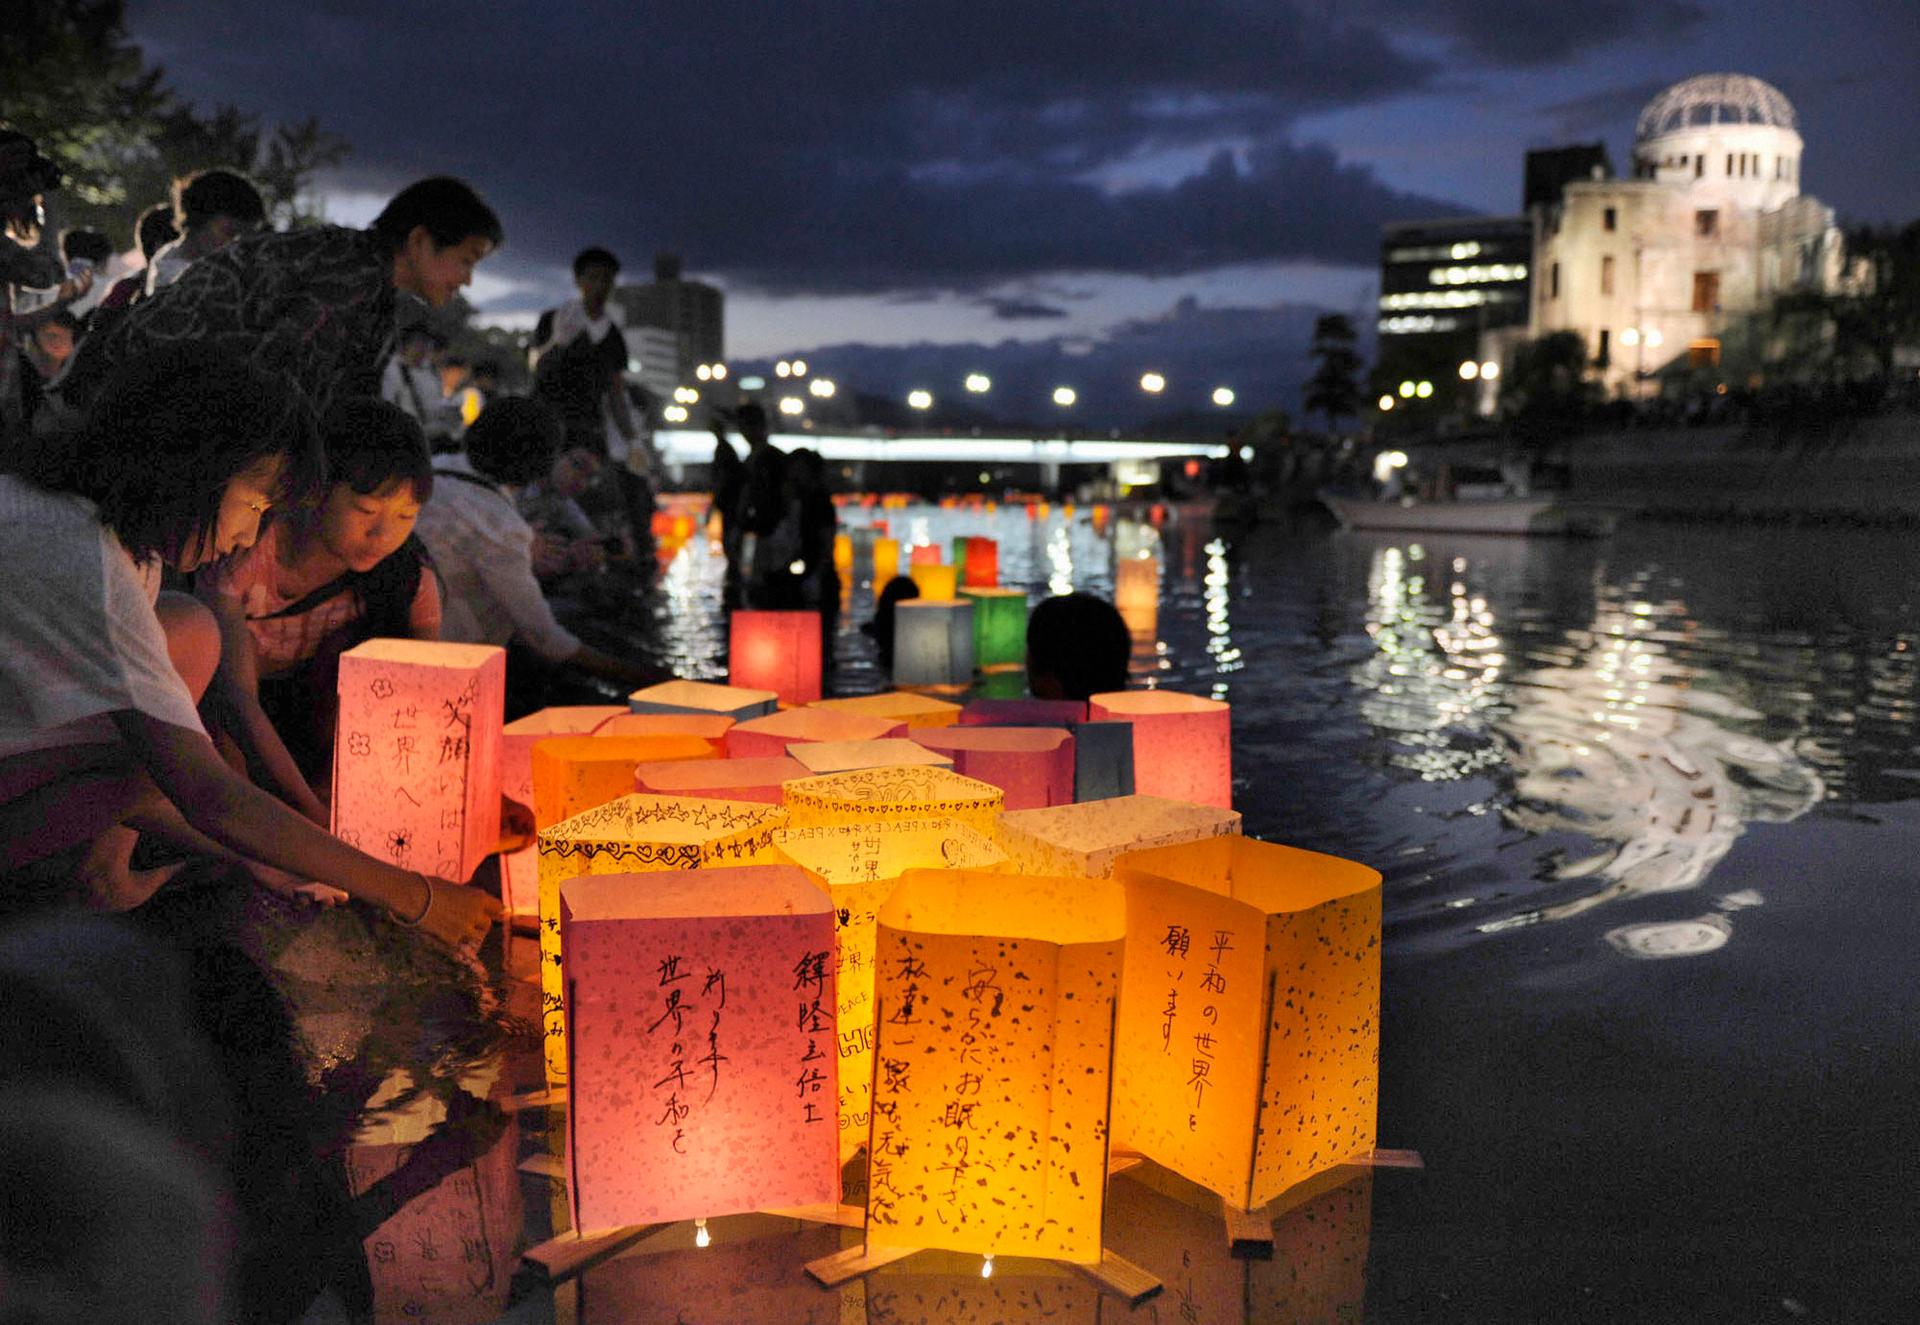 Hiroshima residents release paper lanterns on the Motoyasu river facing the gutted Atomic Bomb Dome in remembrance of atomic bomb victims on the 67th anniversary of the bombing.